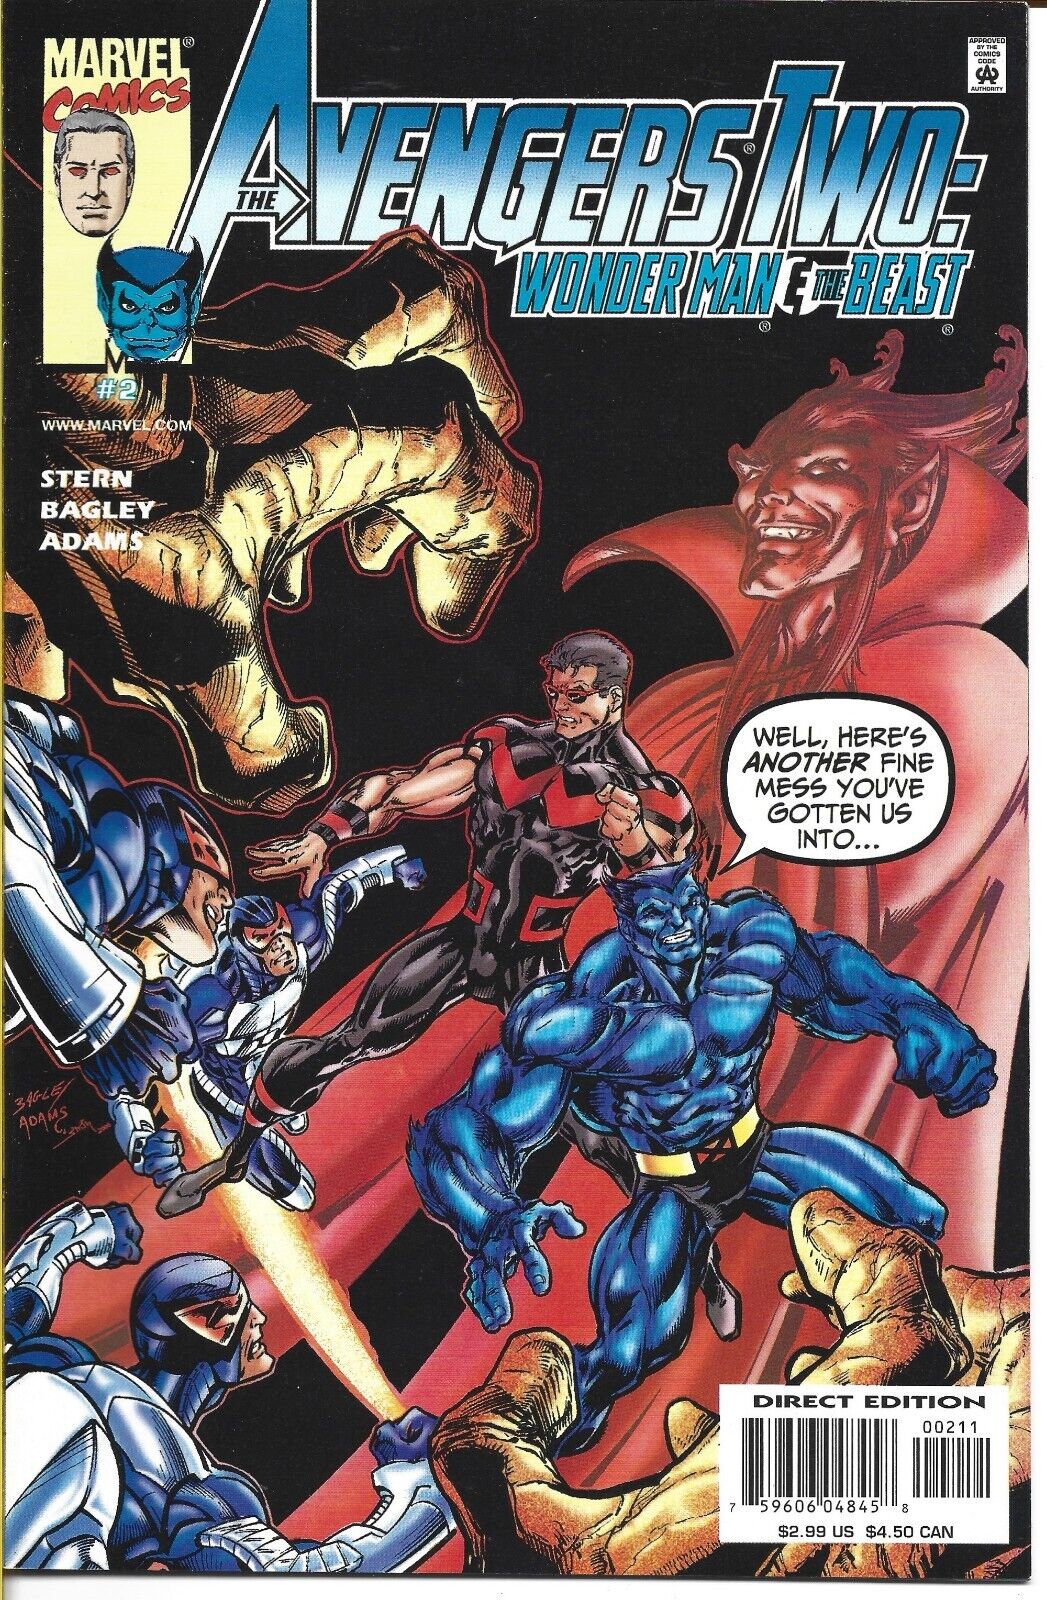 AVENGERS TWO WONDER MAN AND BEAST #2 MARVEL COMICS 2000 BAGGED AND BOARDED